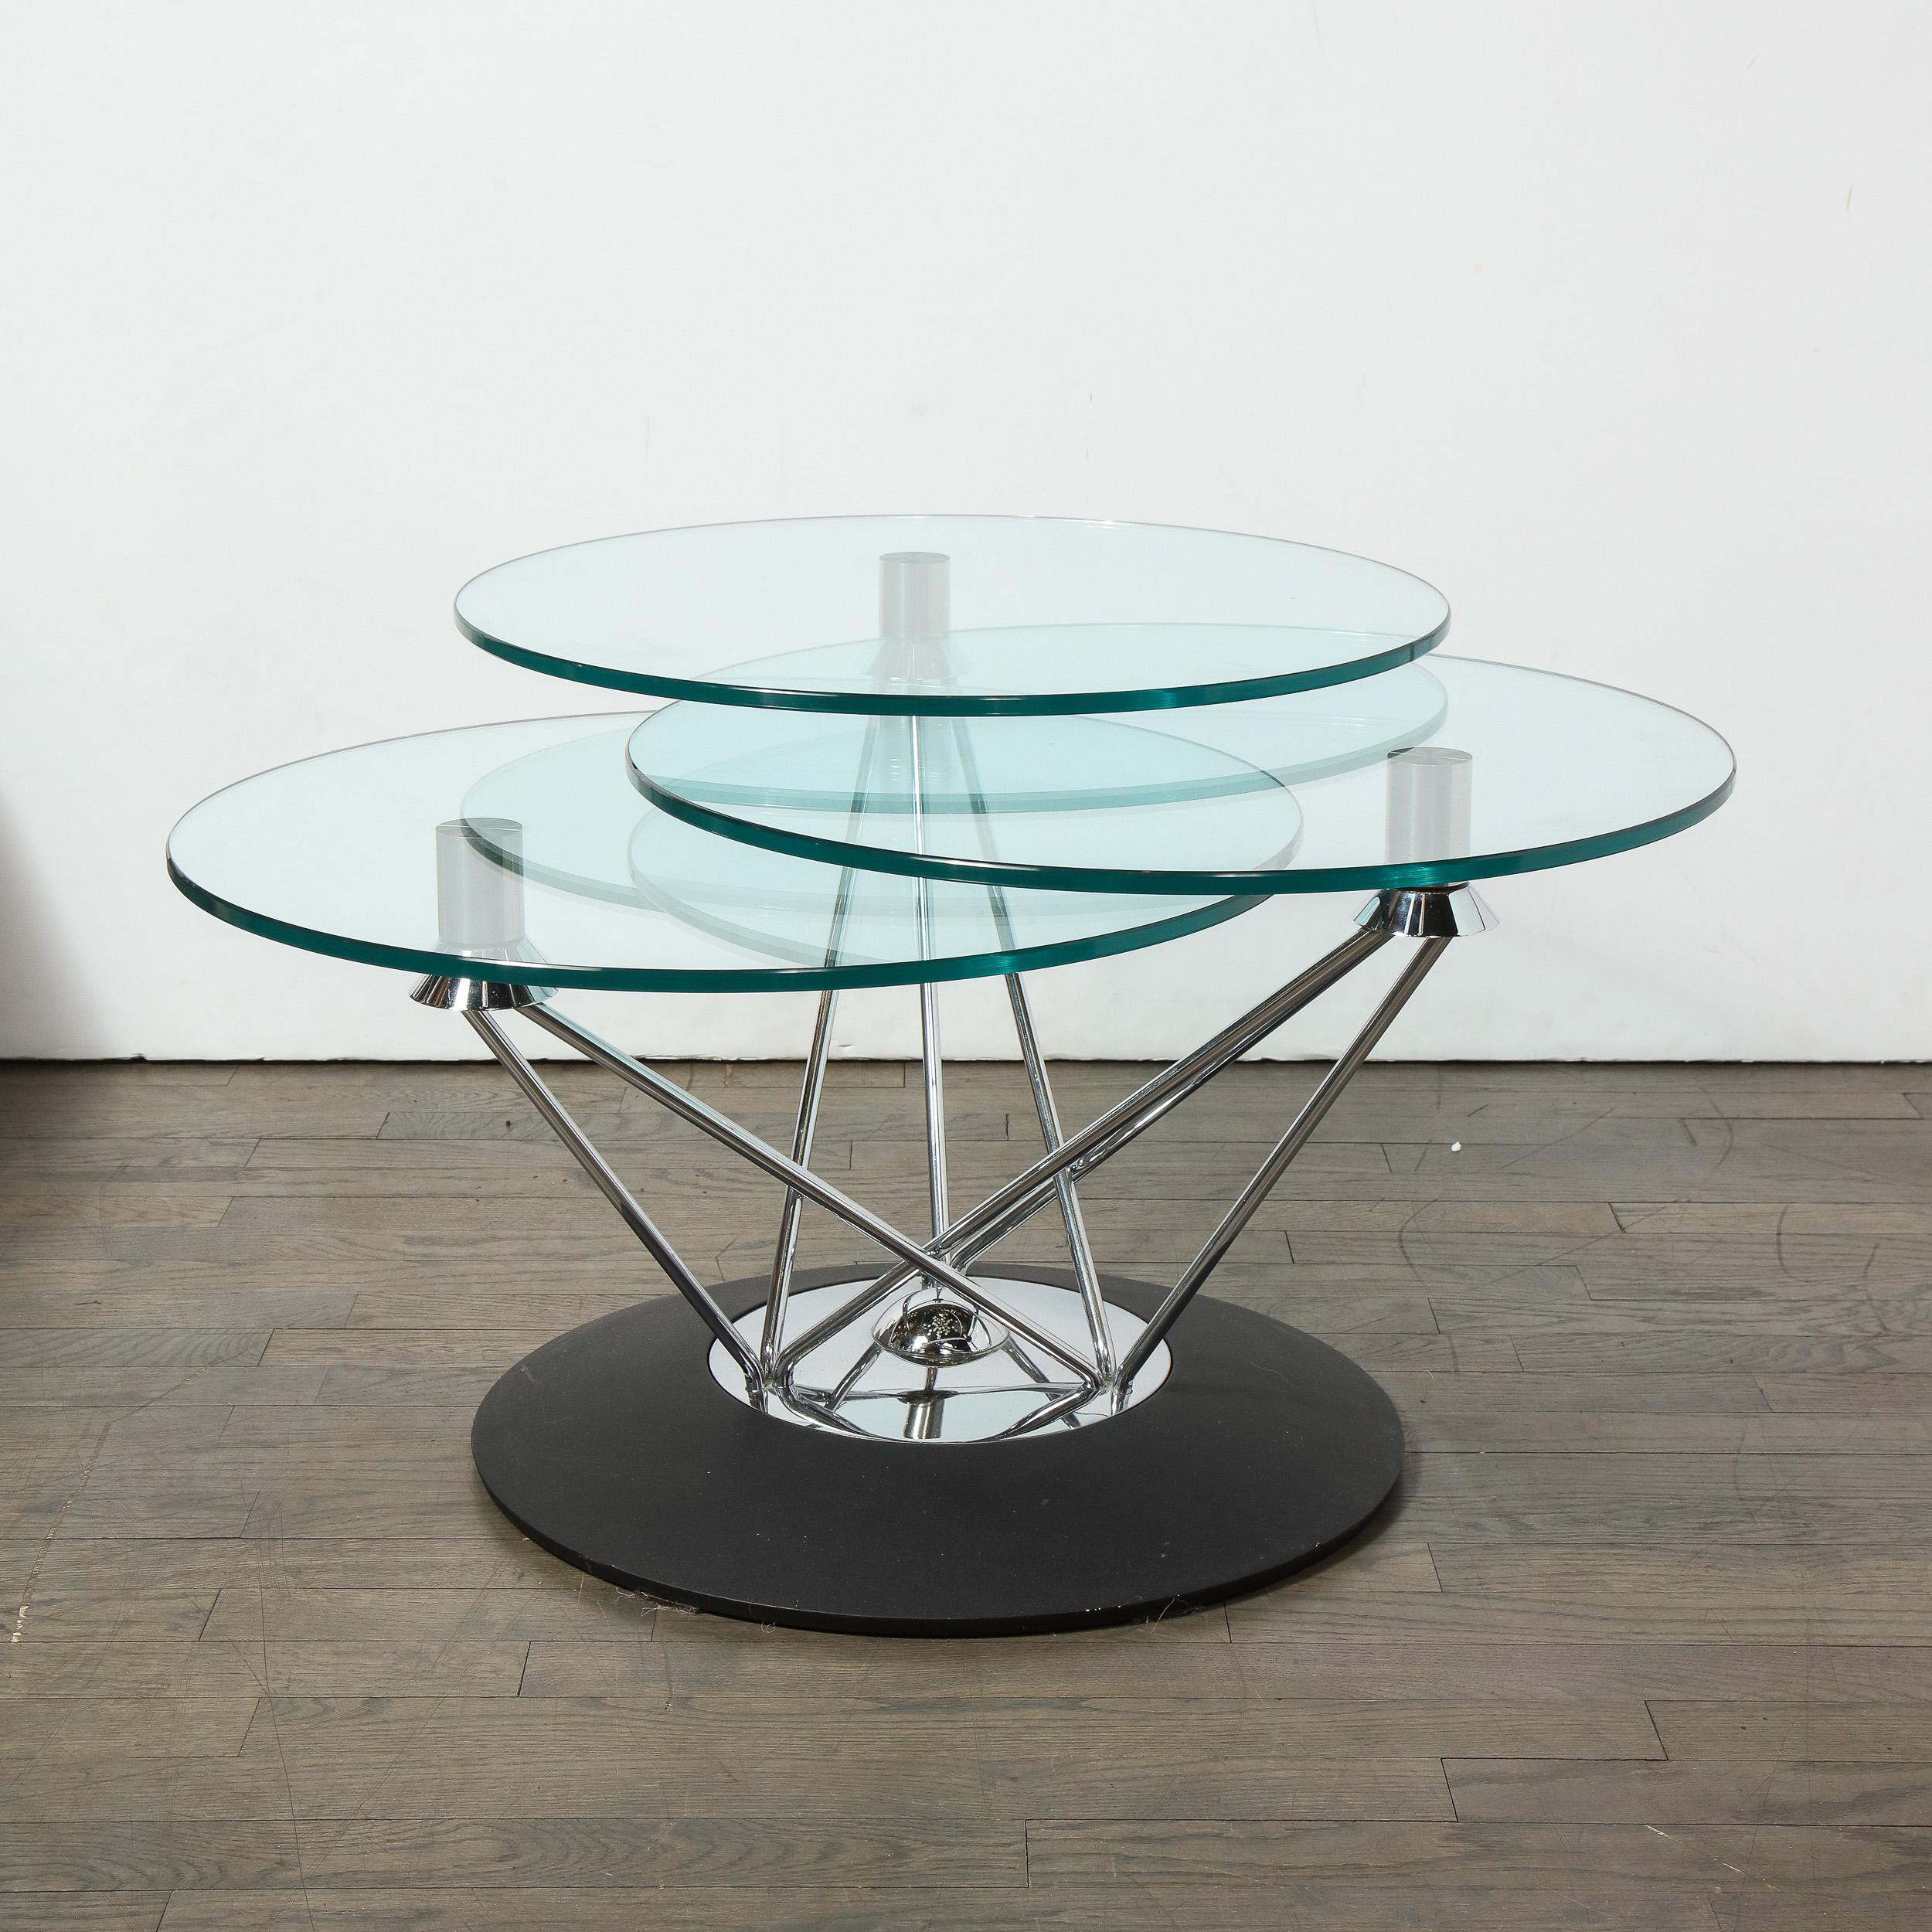 This sculptural and graphic Mid-Century Modern cocktail table was realized in the United States, circa 1970. IT features a gently concave black enamel base capped with a circular polished chrome cap with a finial of the same material emanating from